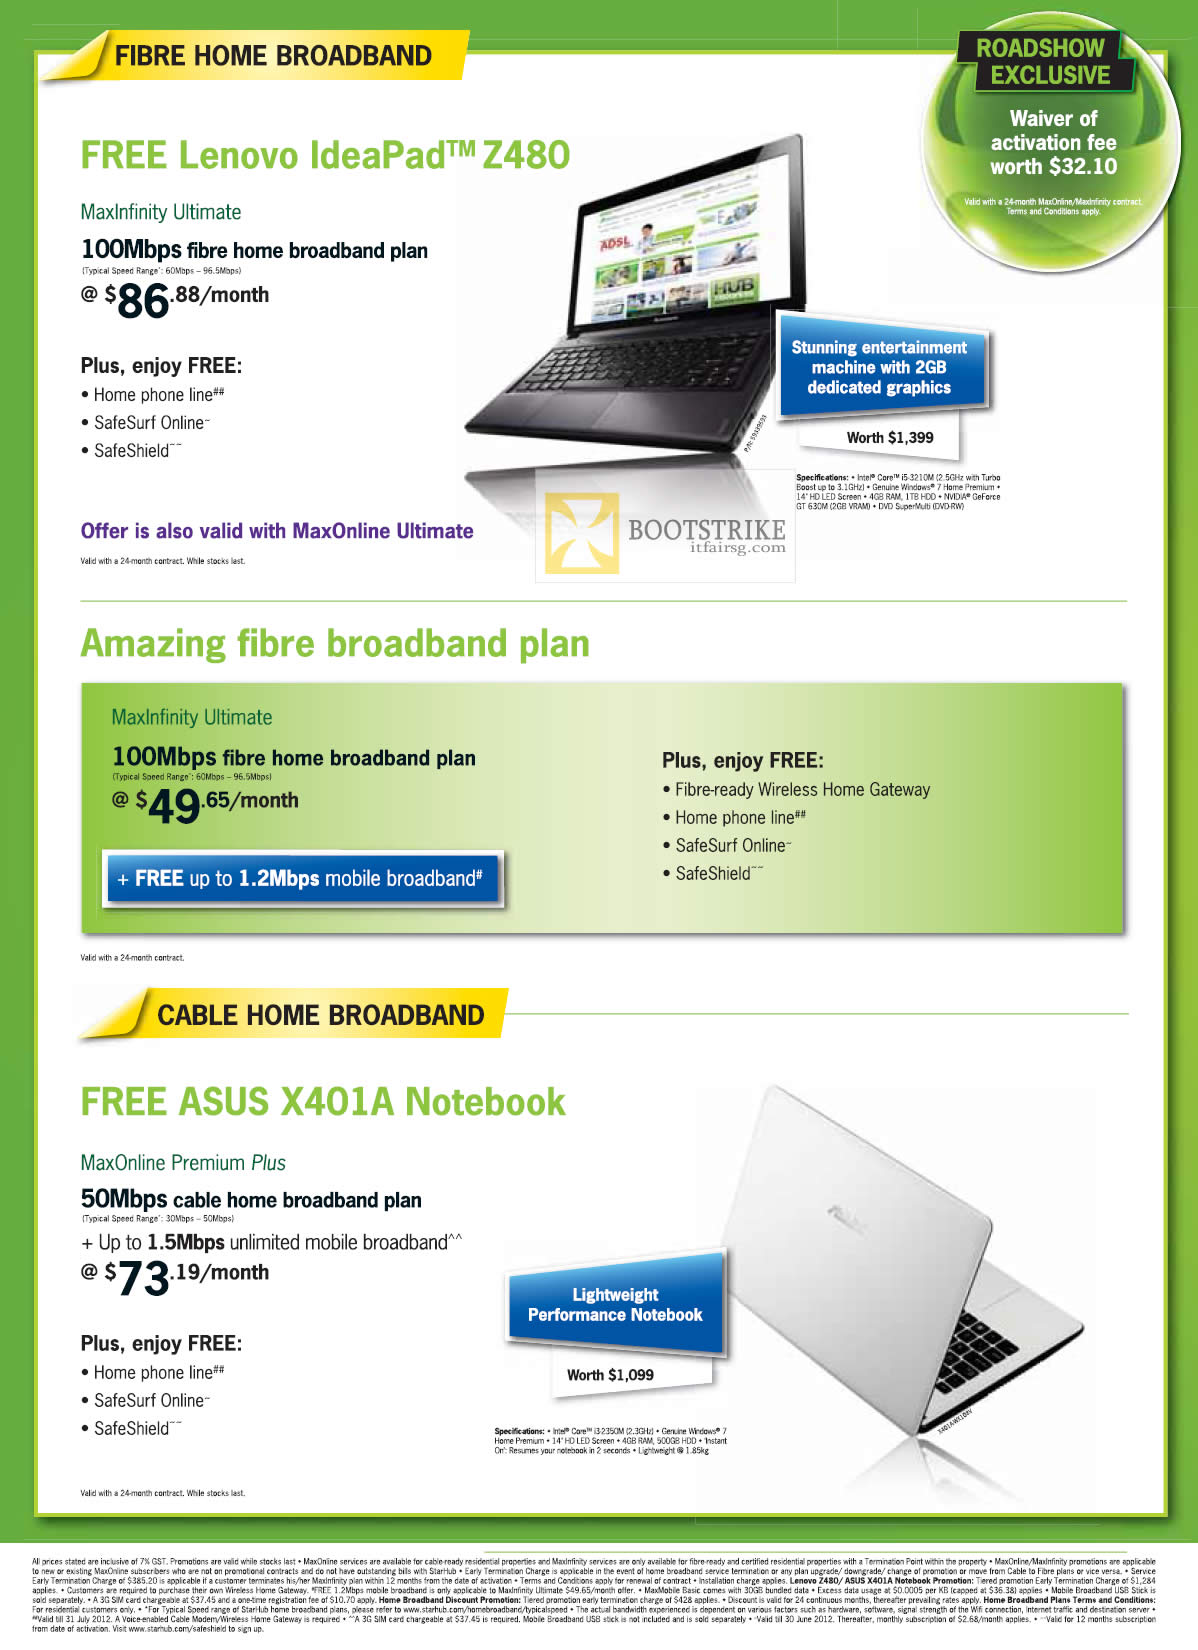 PC SHOW 2012 price list image brochure of Starhub Broadband Fibre Free Lenovo IdeaPad Z480 100Mbps MaxInfinity Ultimate, Cable Free ASUS X401A Notebook MaxOnline Premium Plus